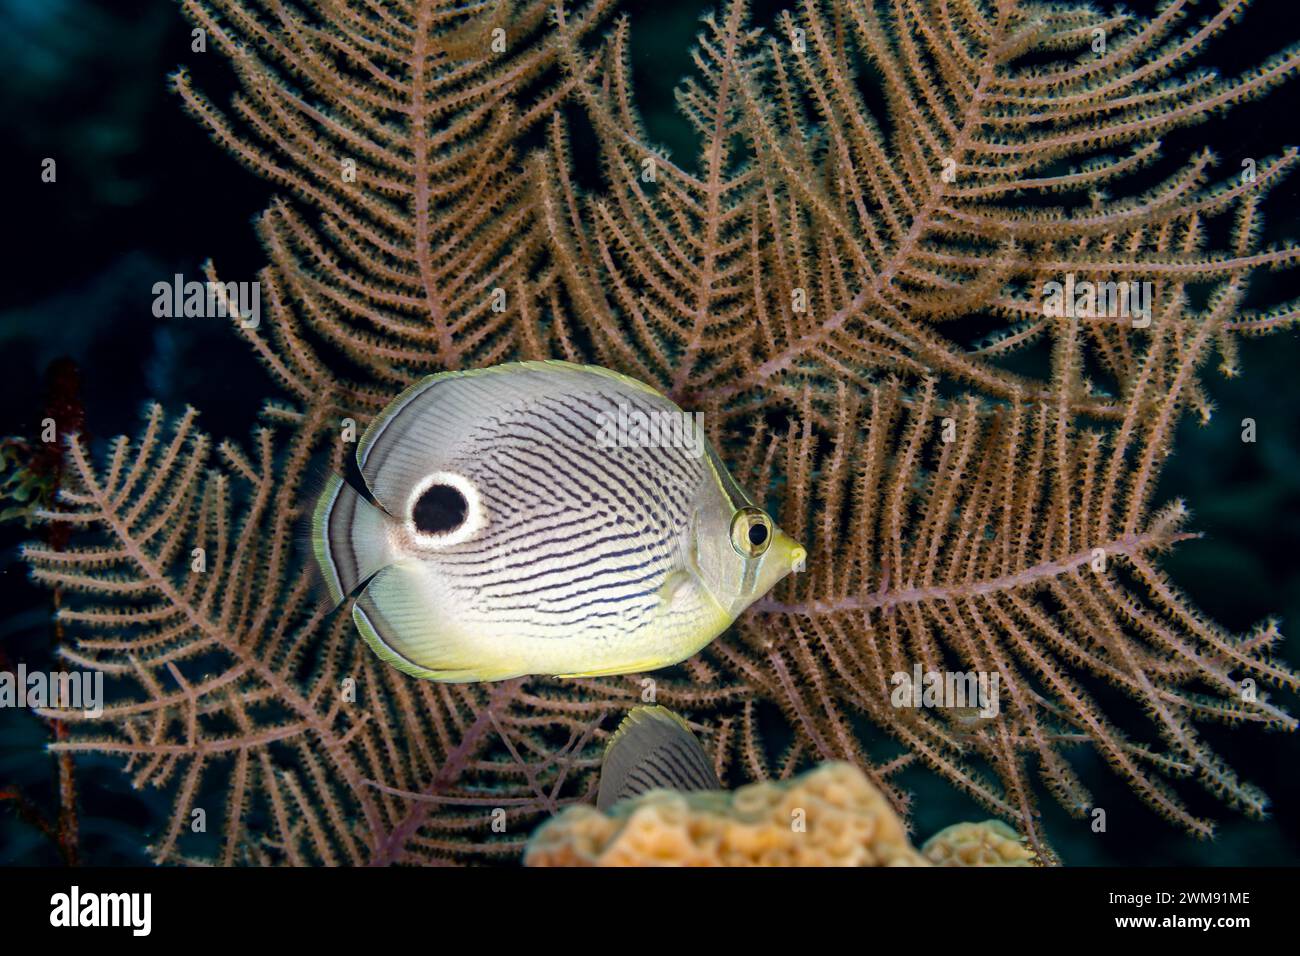 Foureye butterflyfish, Chaetodon capistratus, swims through clear blue waters on a tropical coral reef Stock Photo